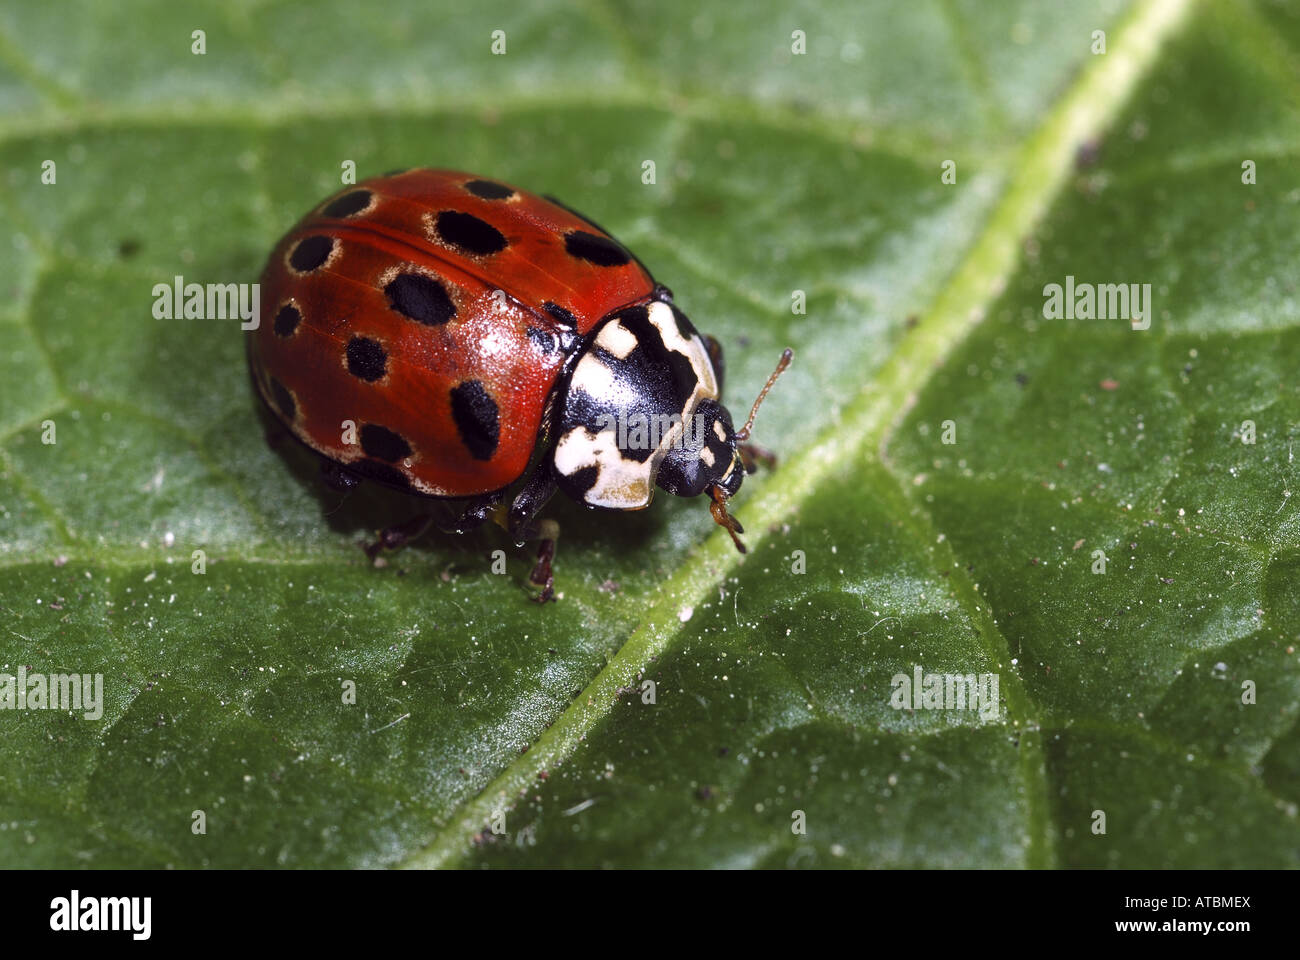 Eyed Coccinelle, coccinelle pin (Anatis ocellata), on leaf Banque D'Images